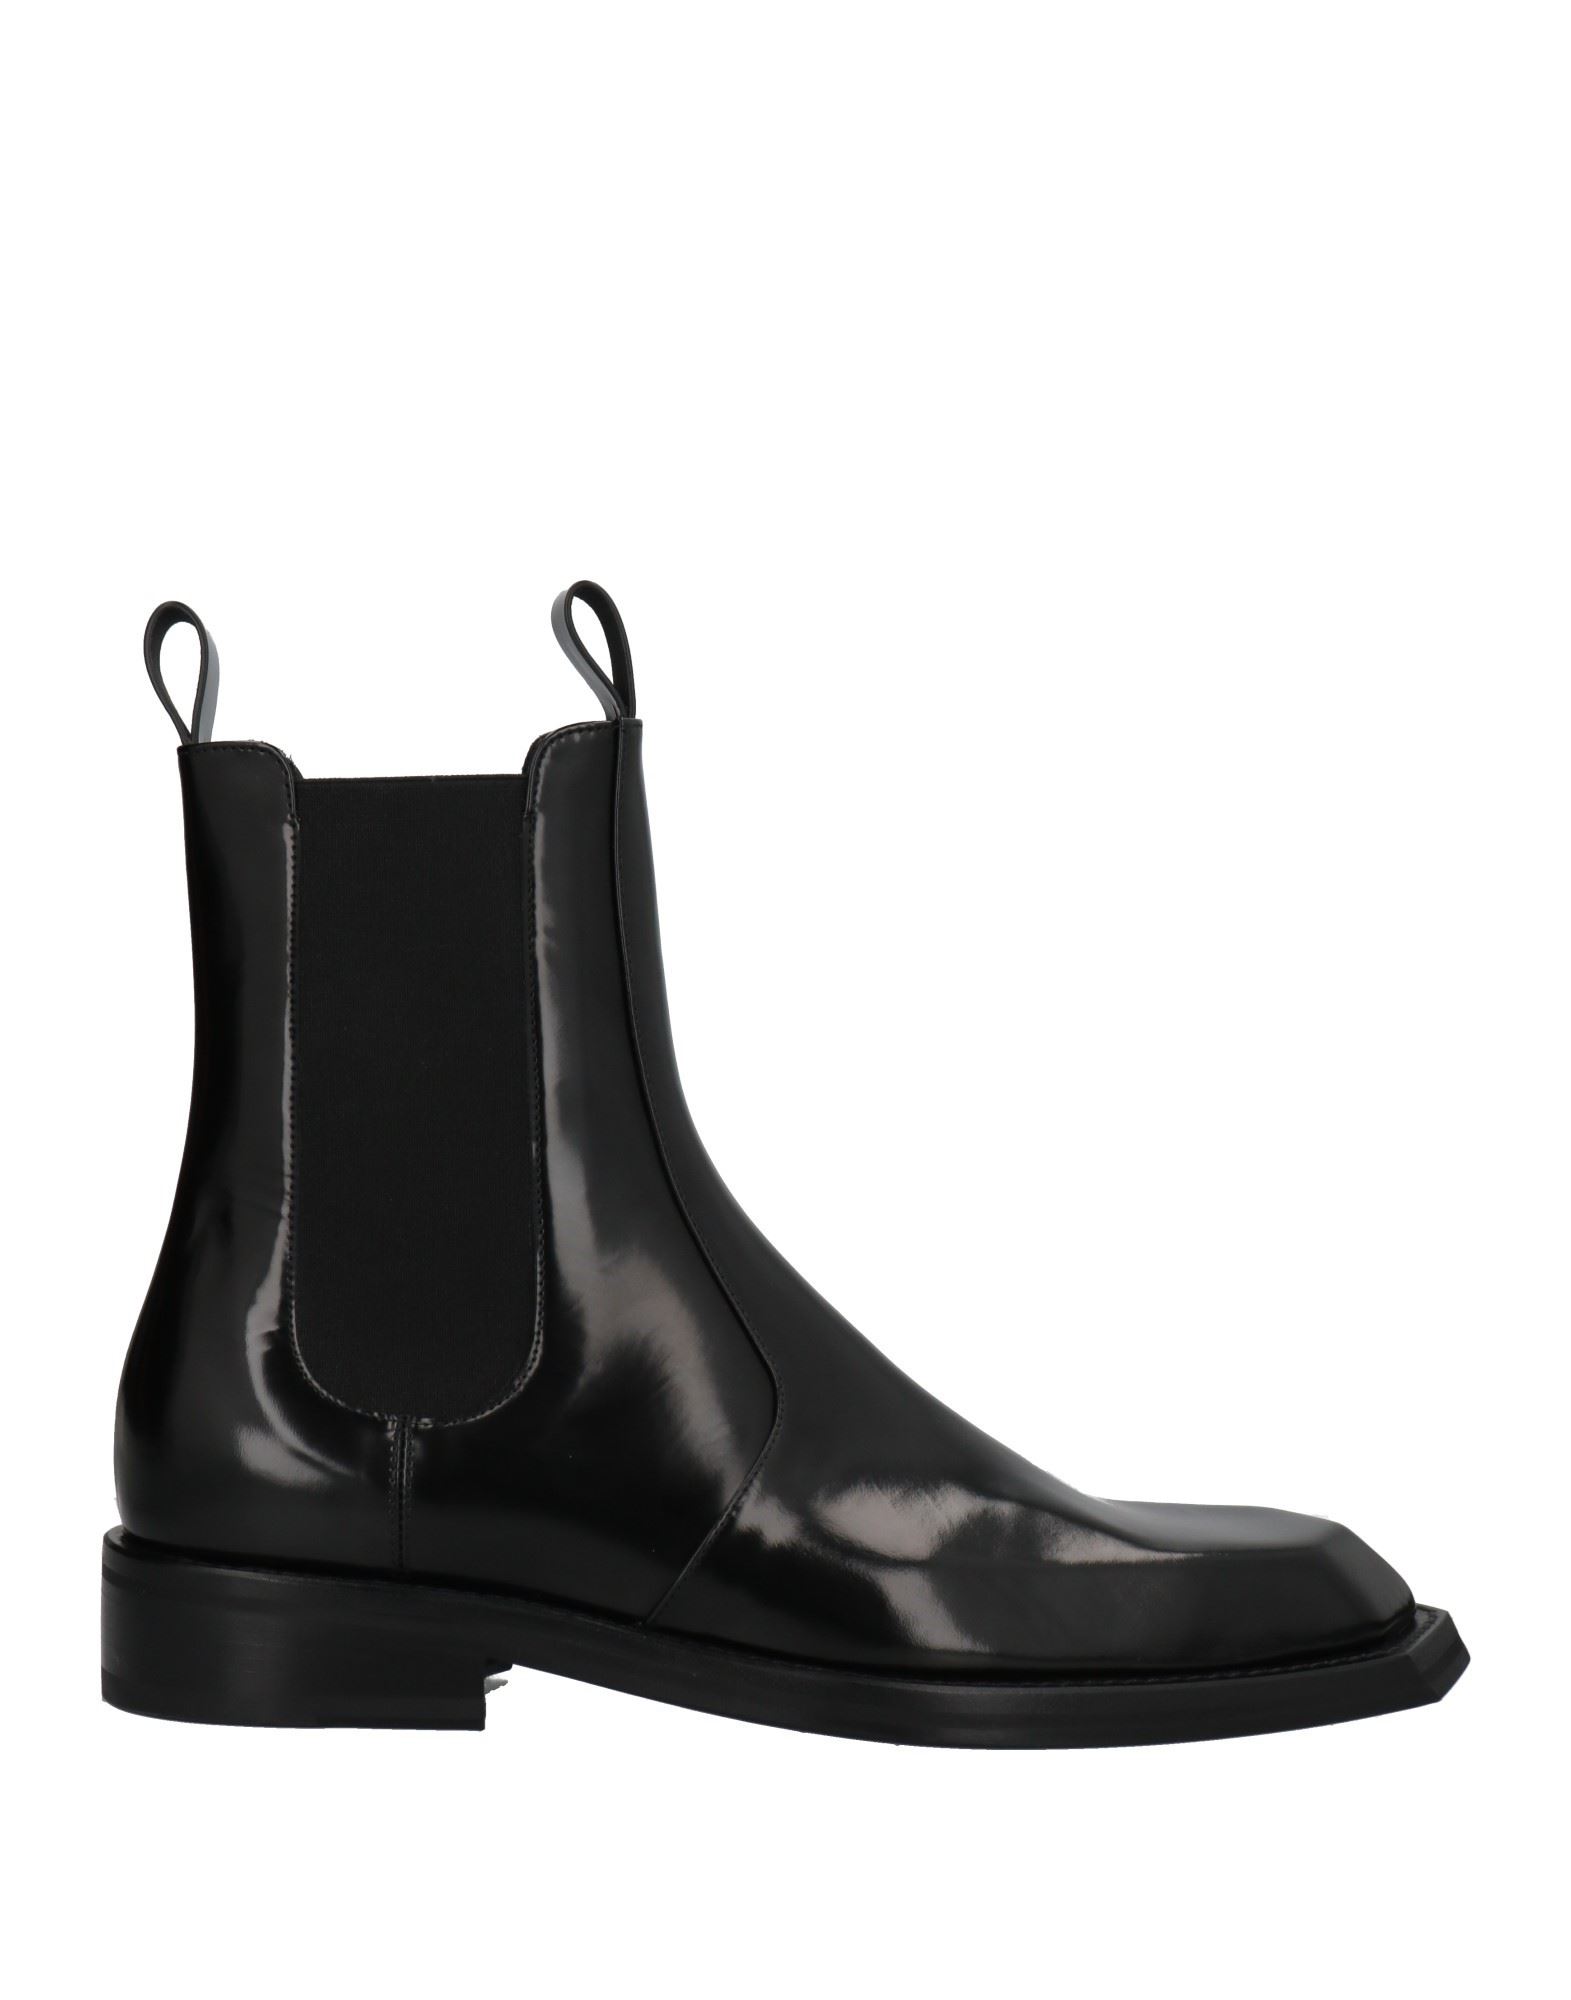 Martine Rose Ankle Boots In Black